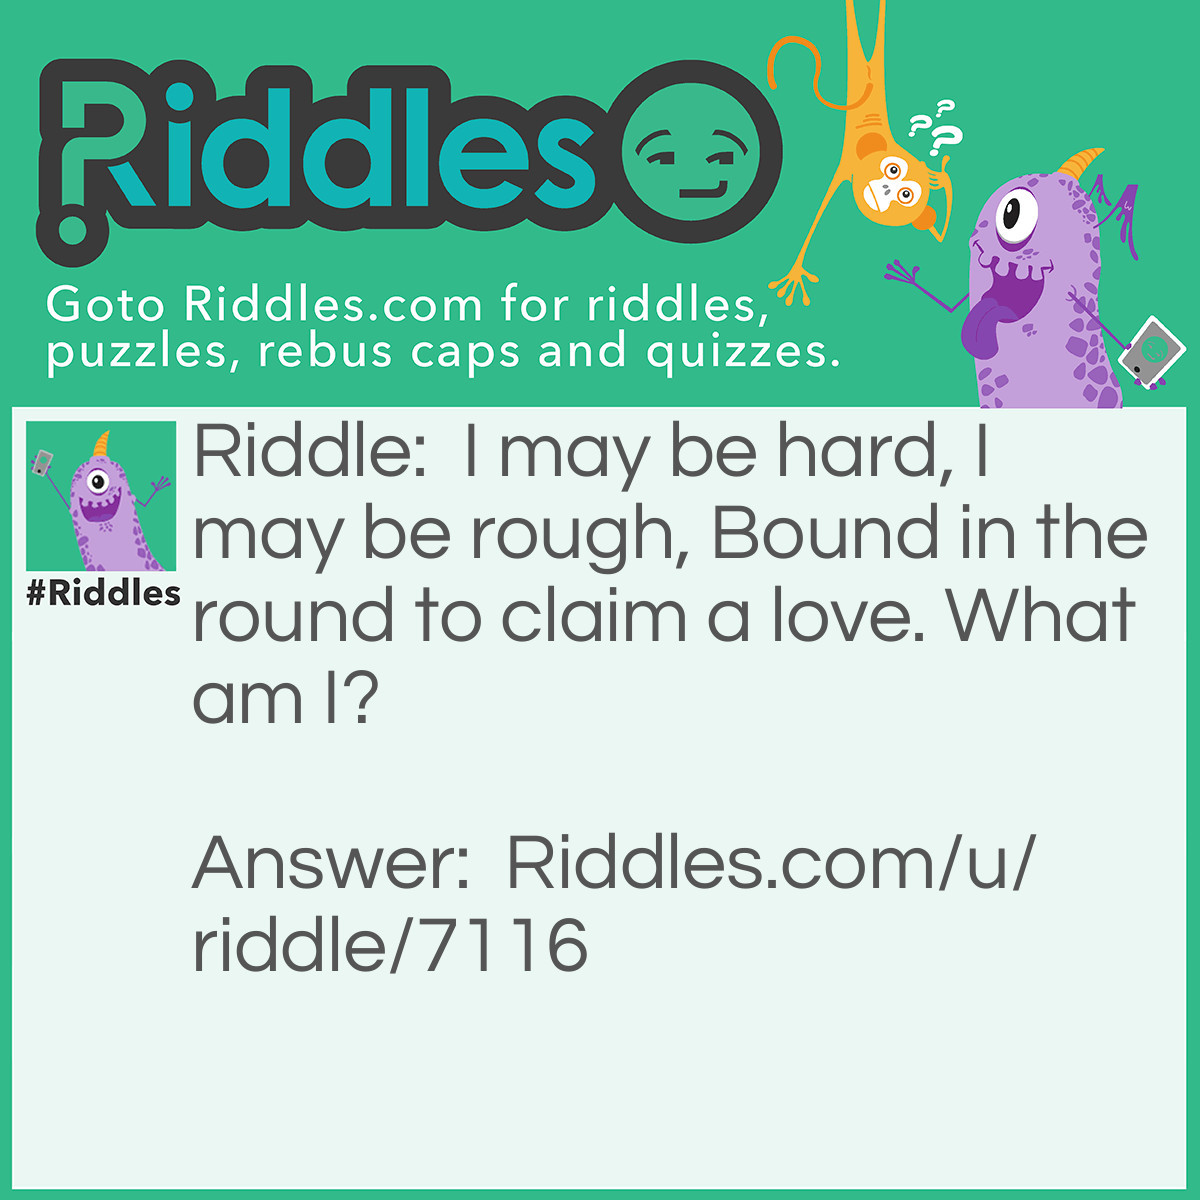 Riddle: I may be hard, I may be rough,
Bound in the round to claim a love.
What am I? Answer: Diamond.